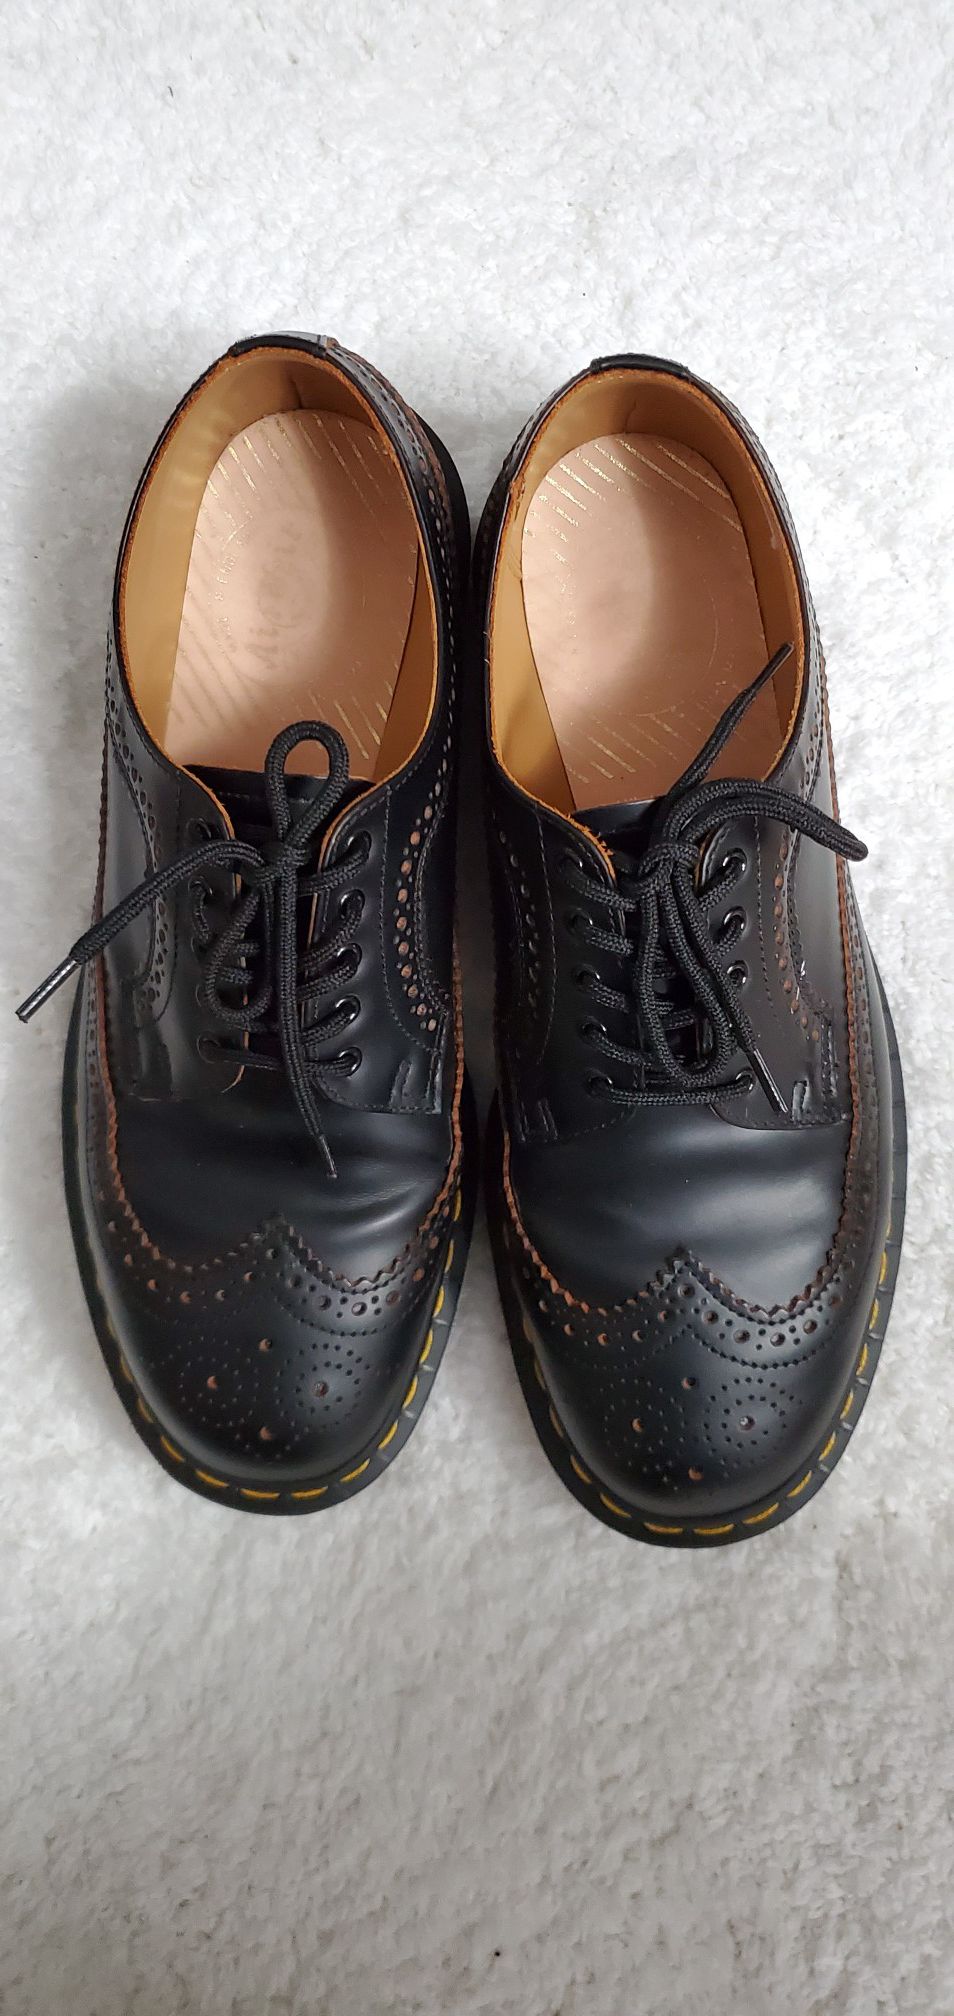 Dr Martens 3989 Made in England